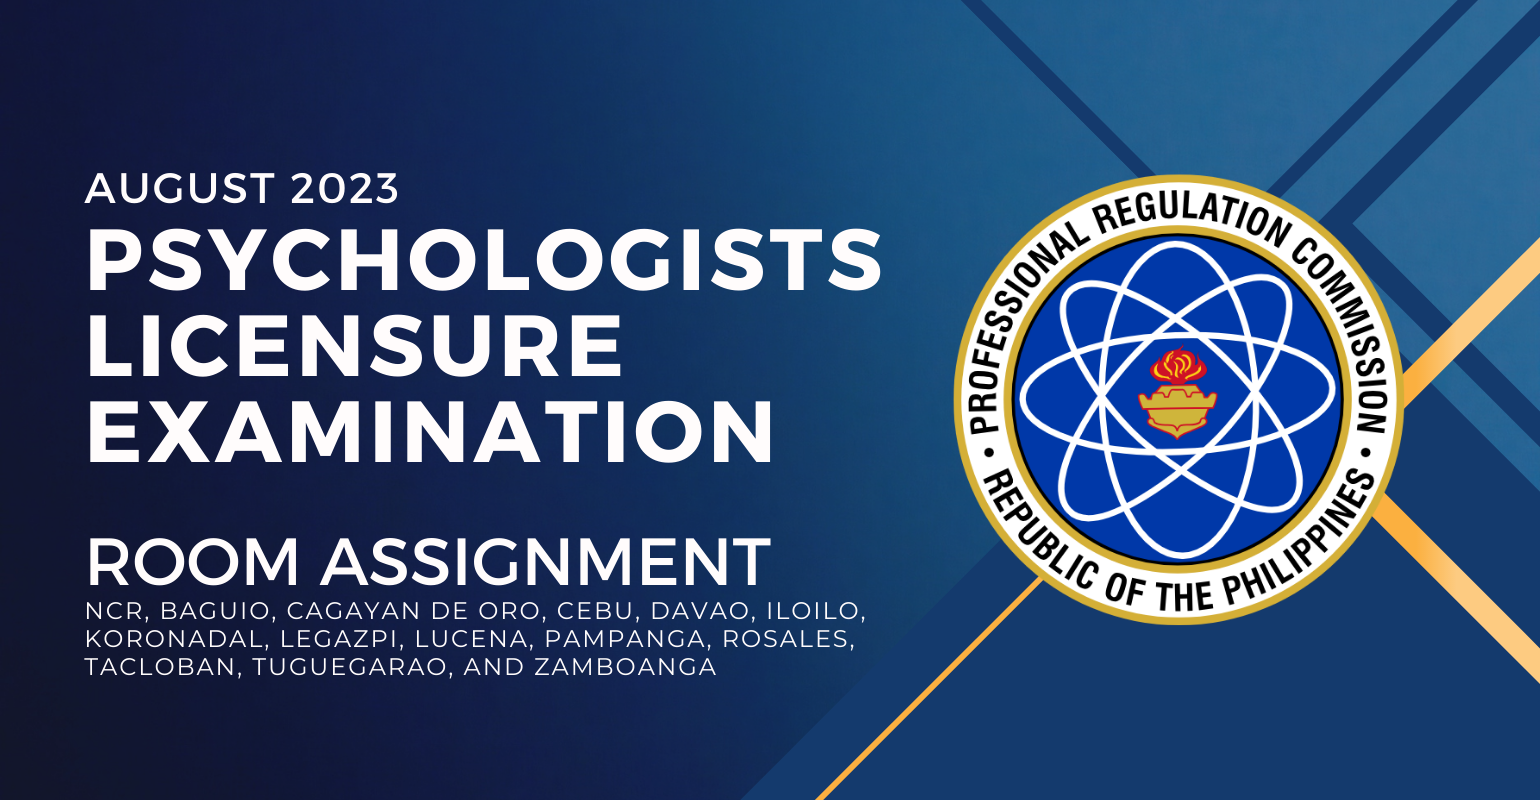 Room Assignment – August 2023 Psychologist Licensure Exams